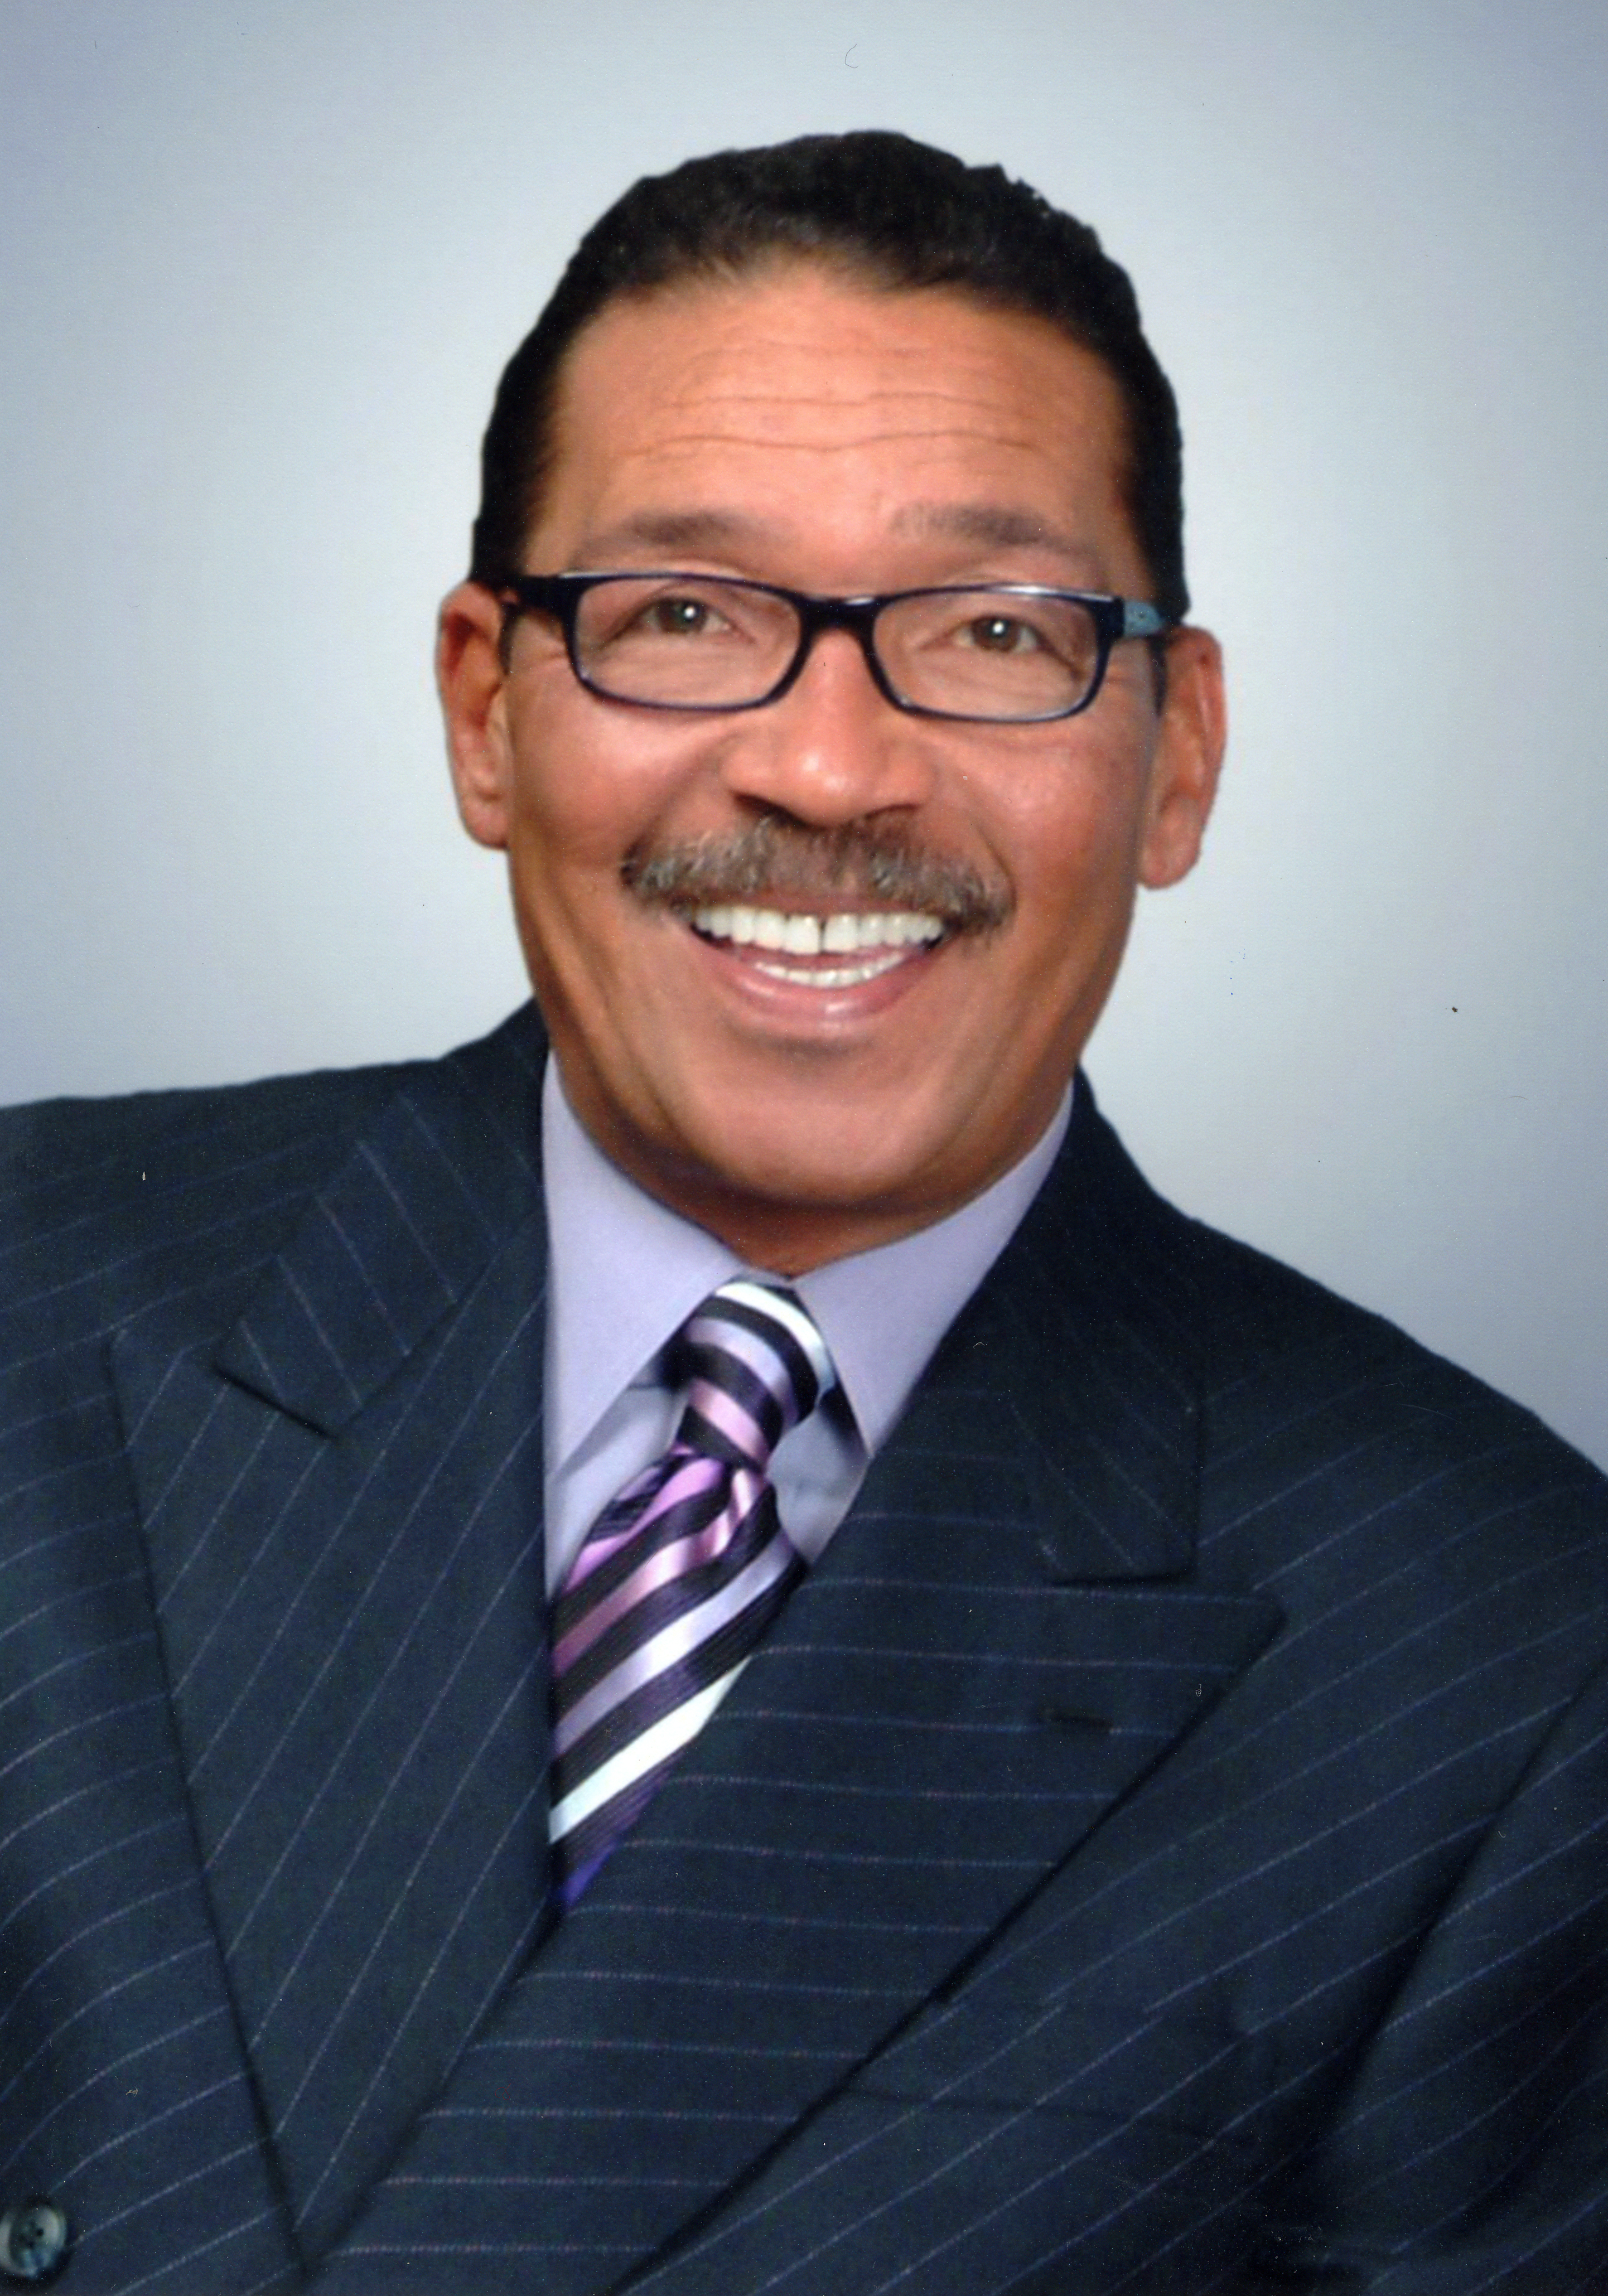 Herb Wesson